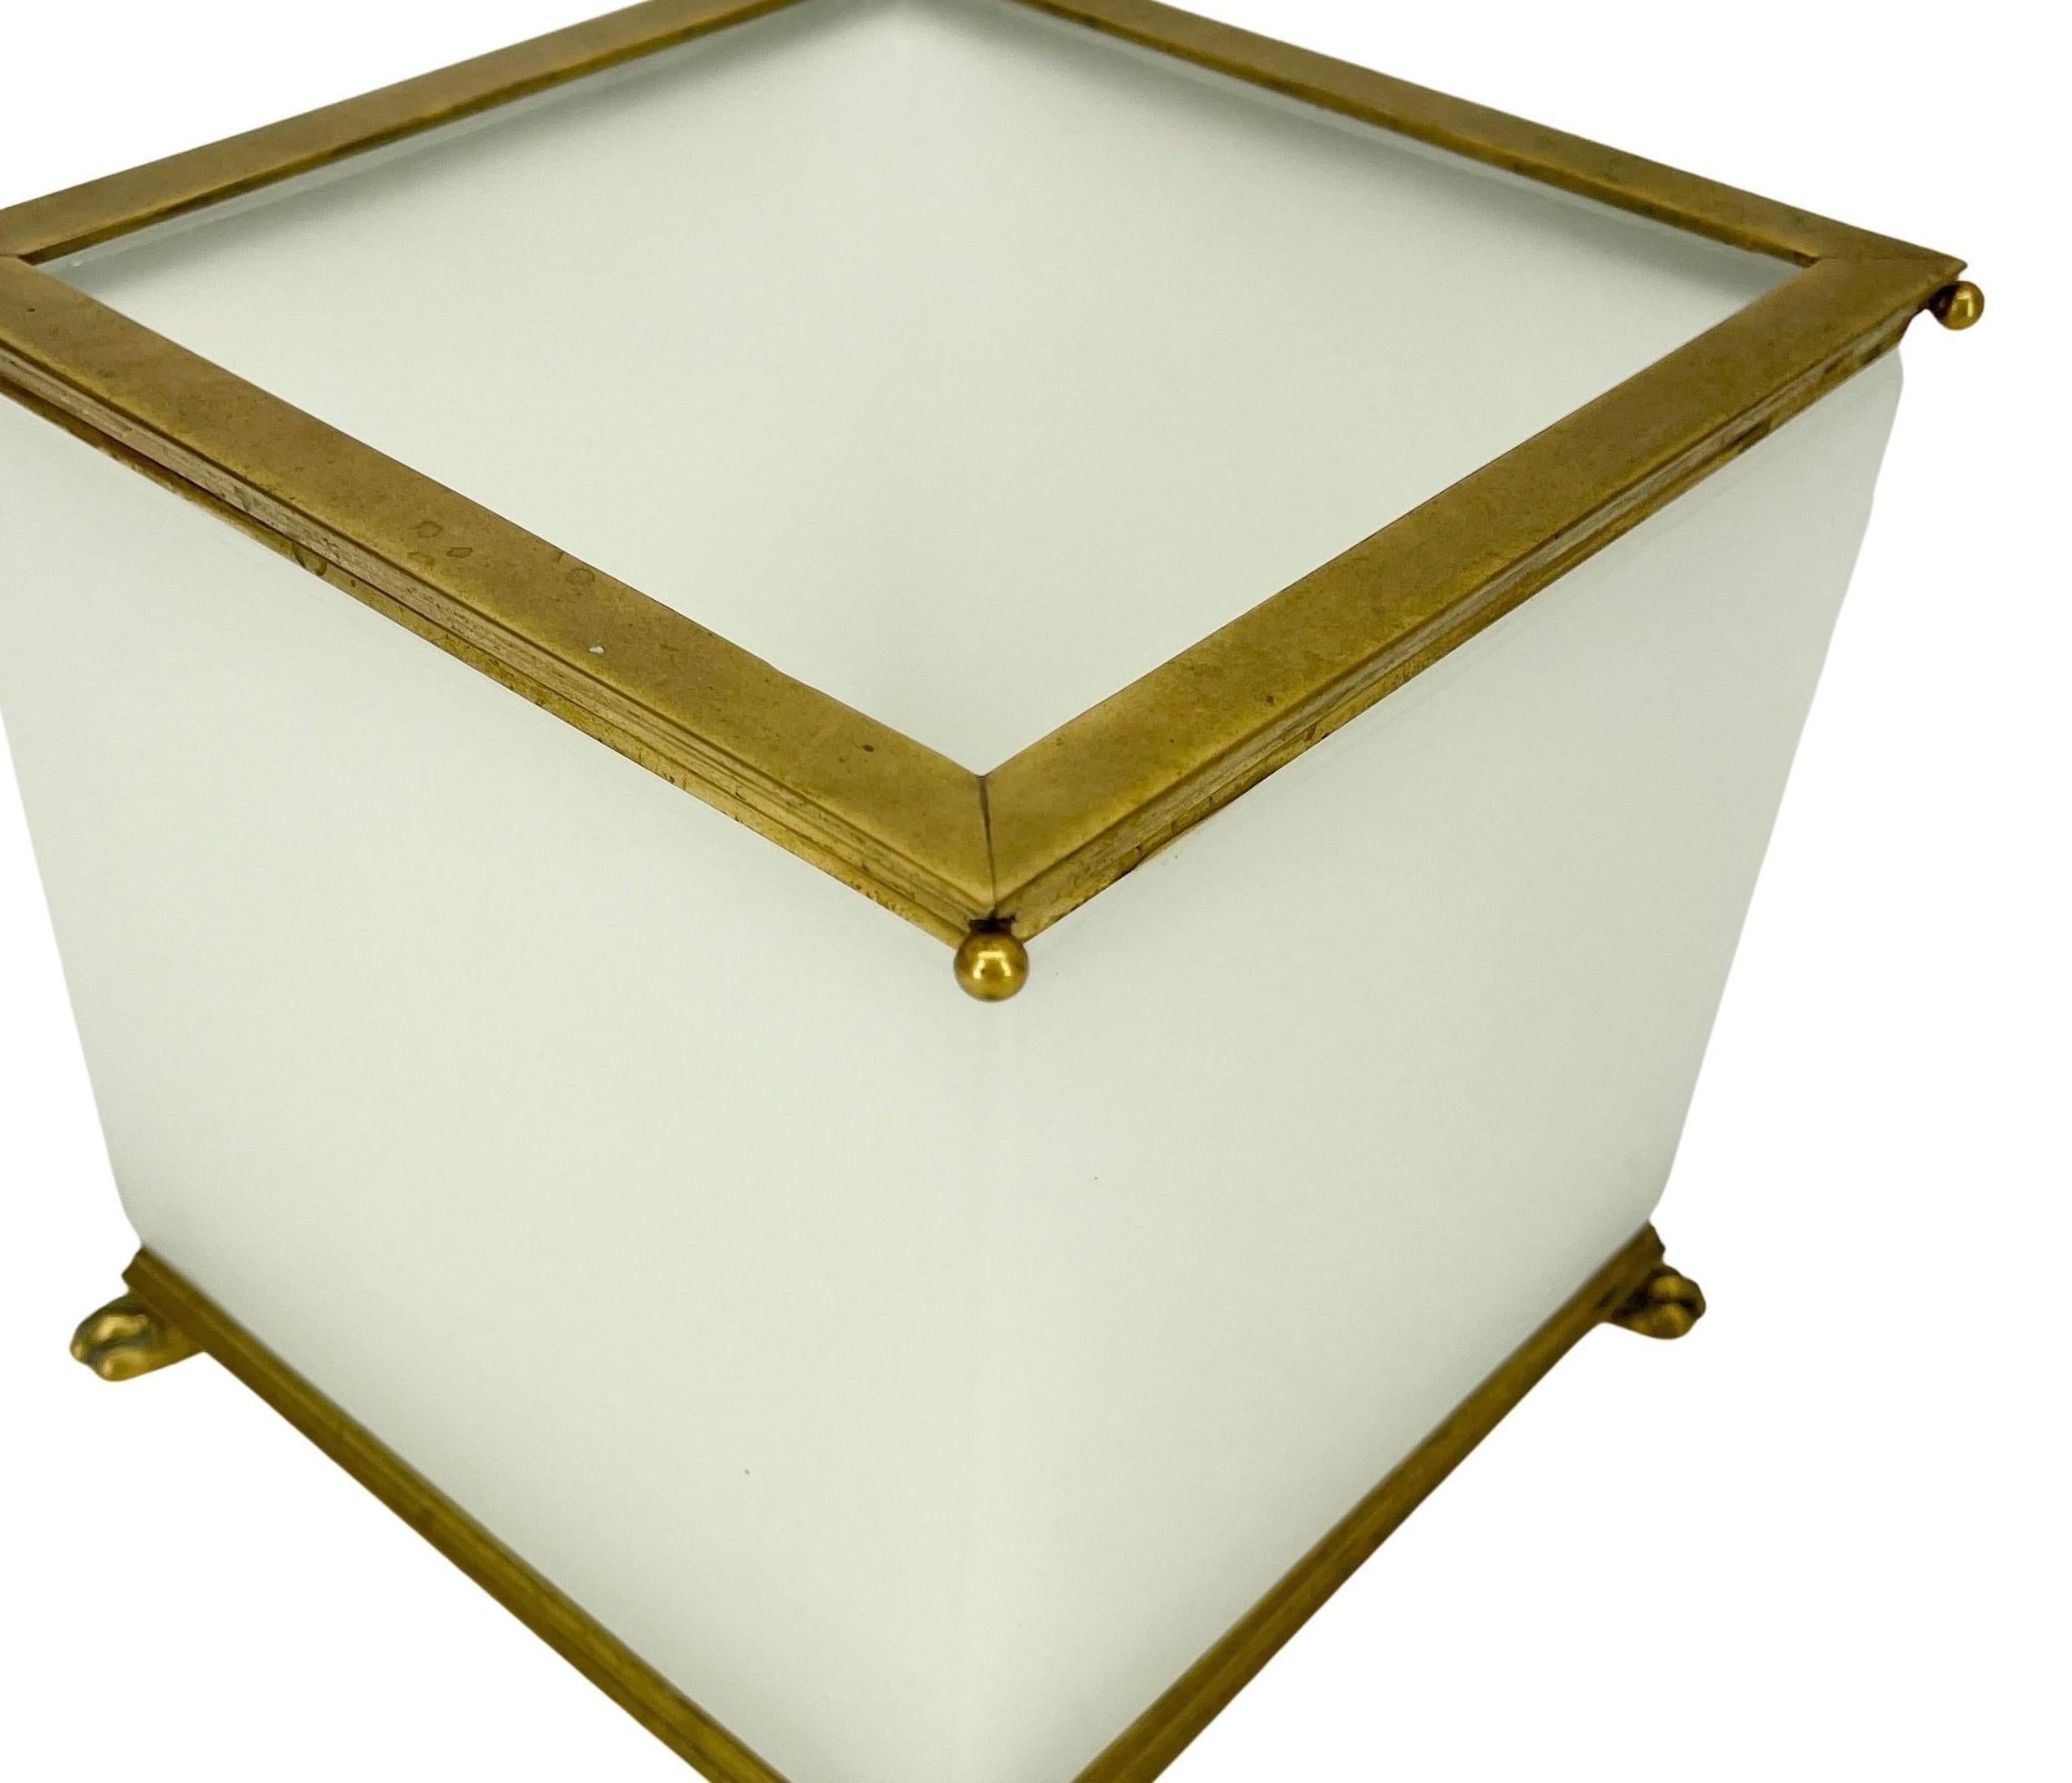 Large Italian Cube Shaped Opaline glass planter Jardiniere With Brass Hardware.
The brass is presented in its authentic patina but can be polished upon buyers request. The brass will in that case be very shiny og gold-like.
All 4 corners have the